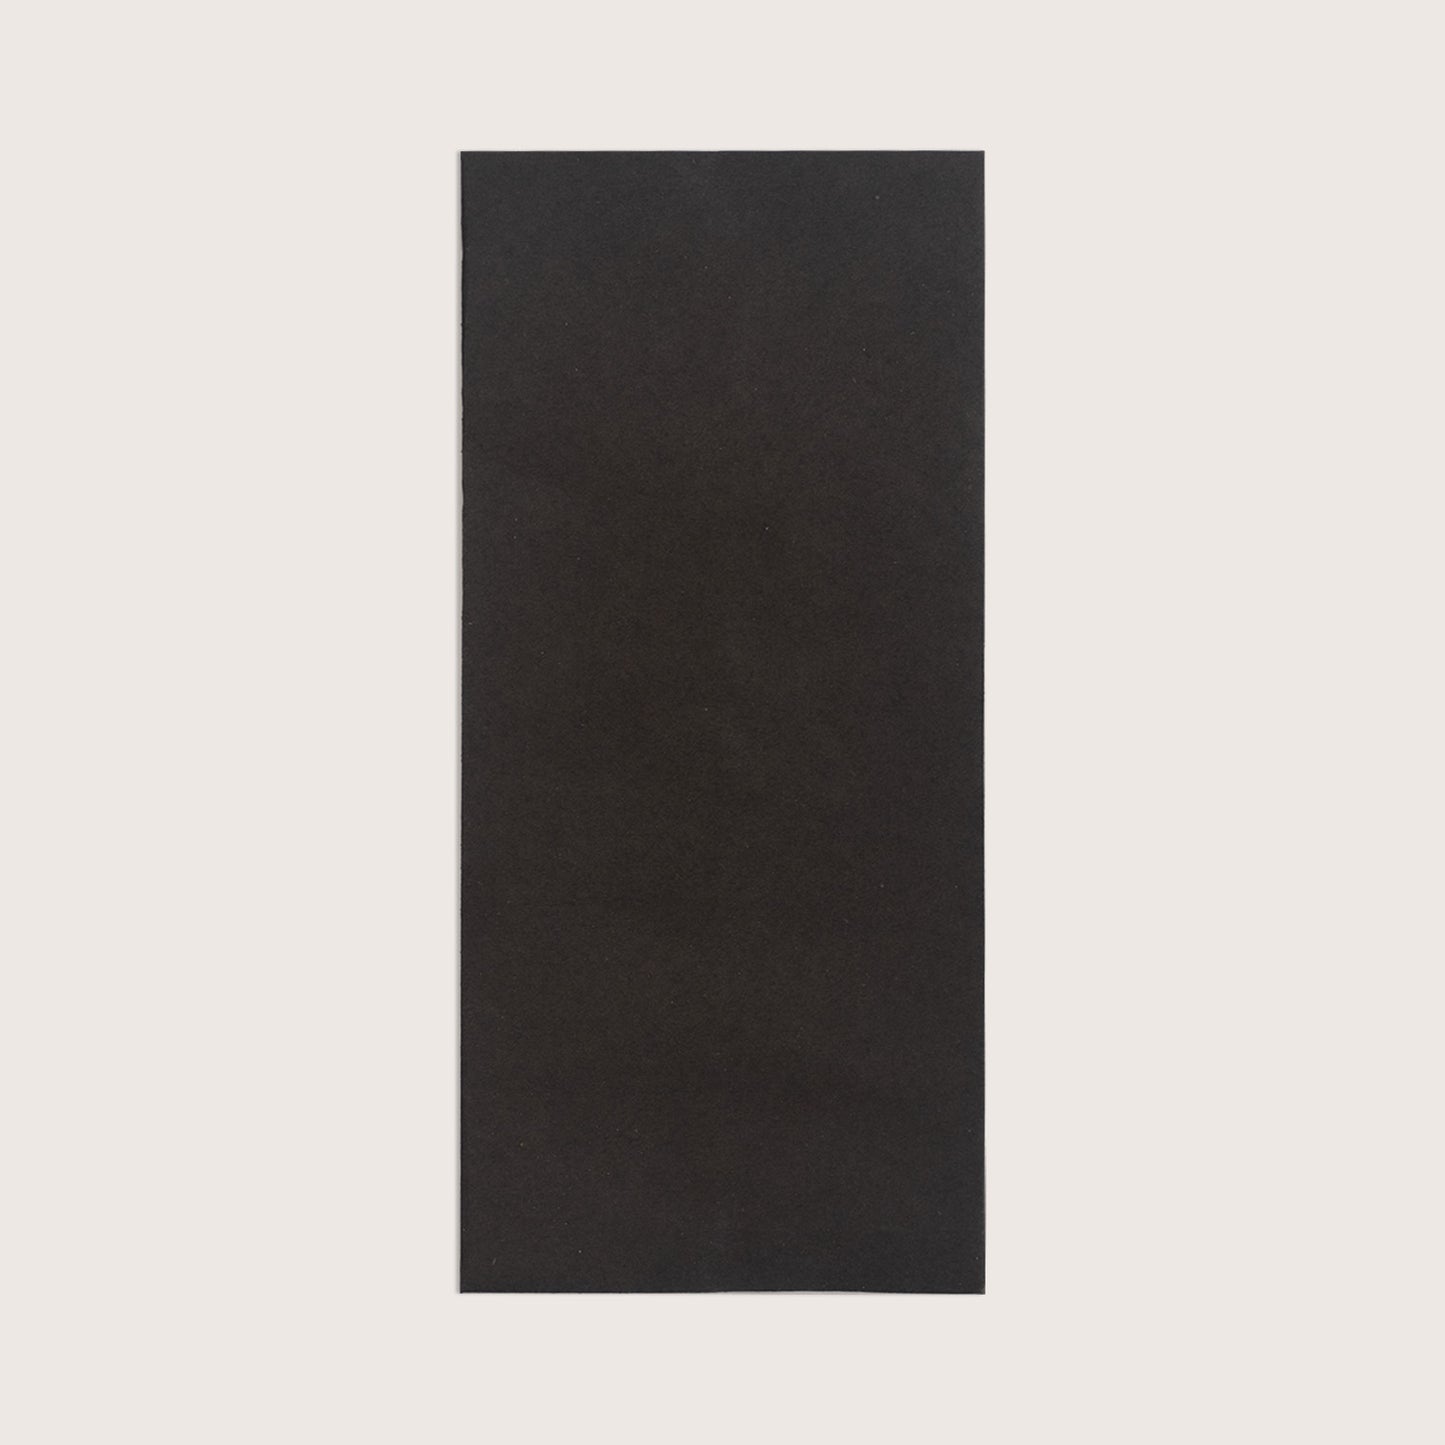 Packmate Black Letter Envelope (Pack of 50 Envelope) | Made From 100% Recycled Paper